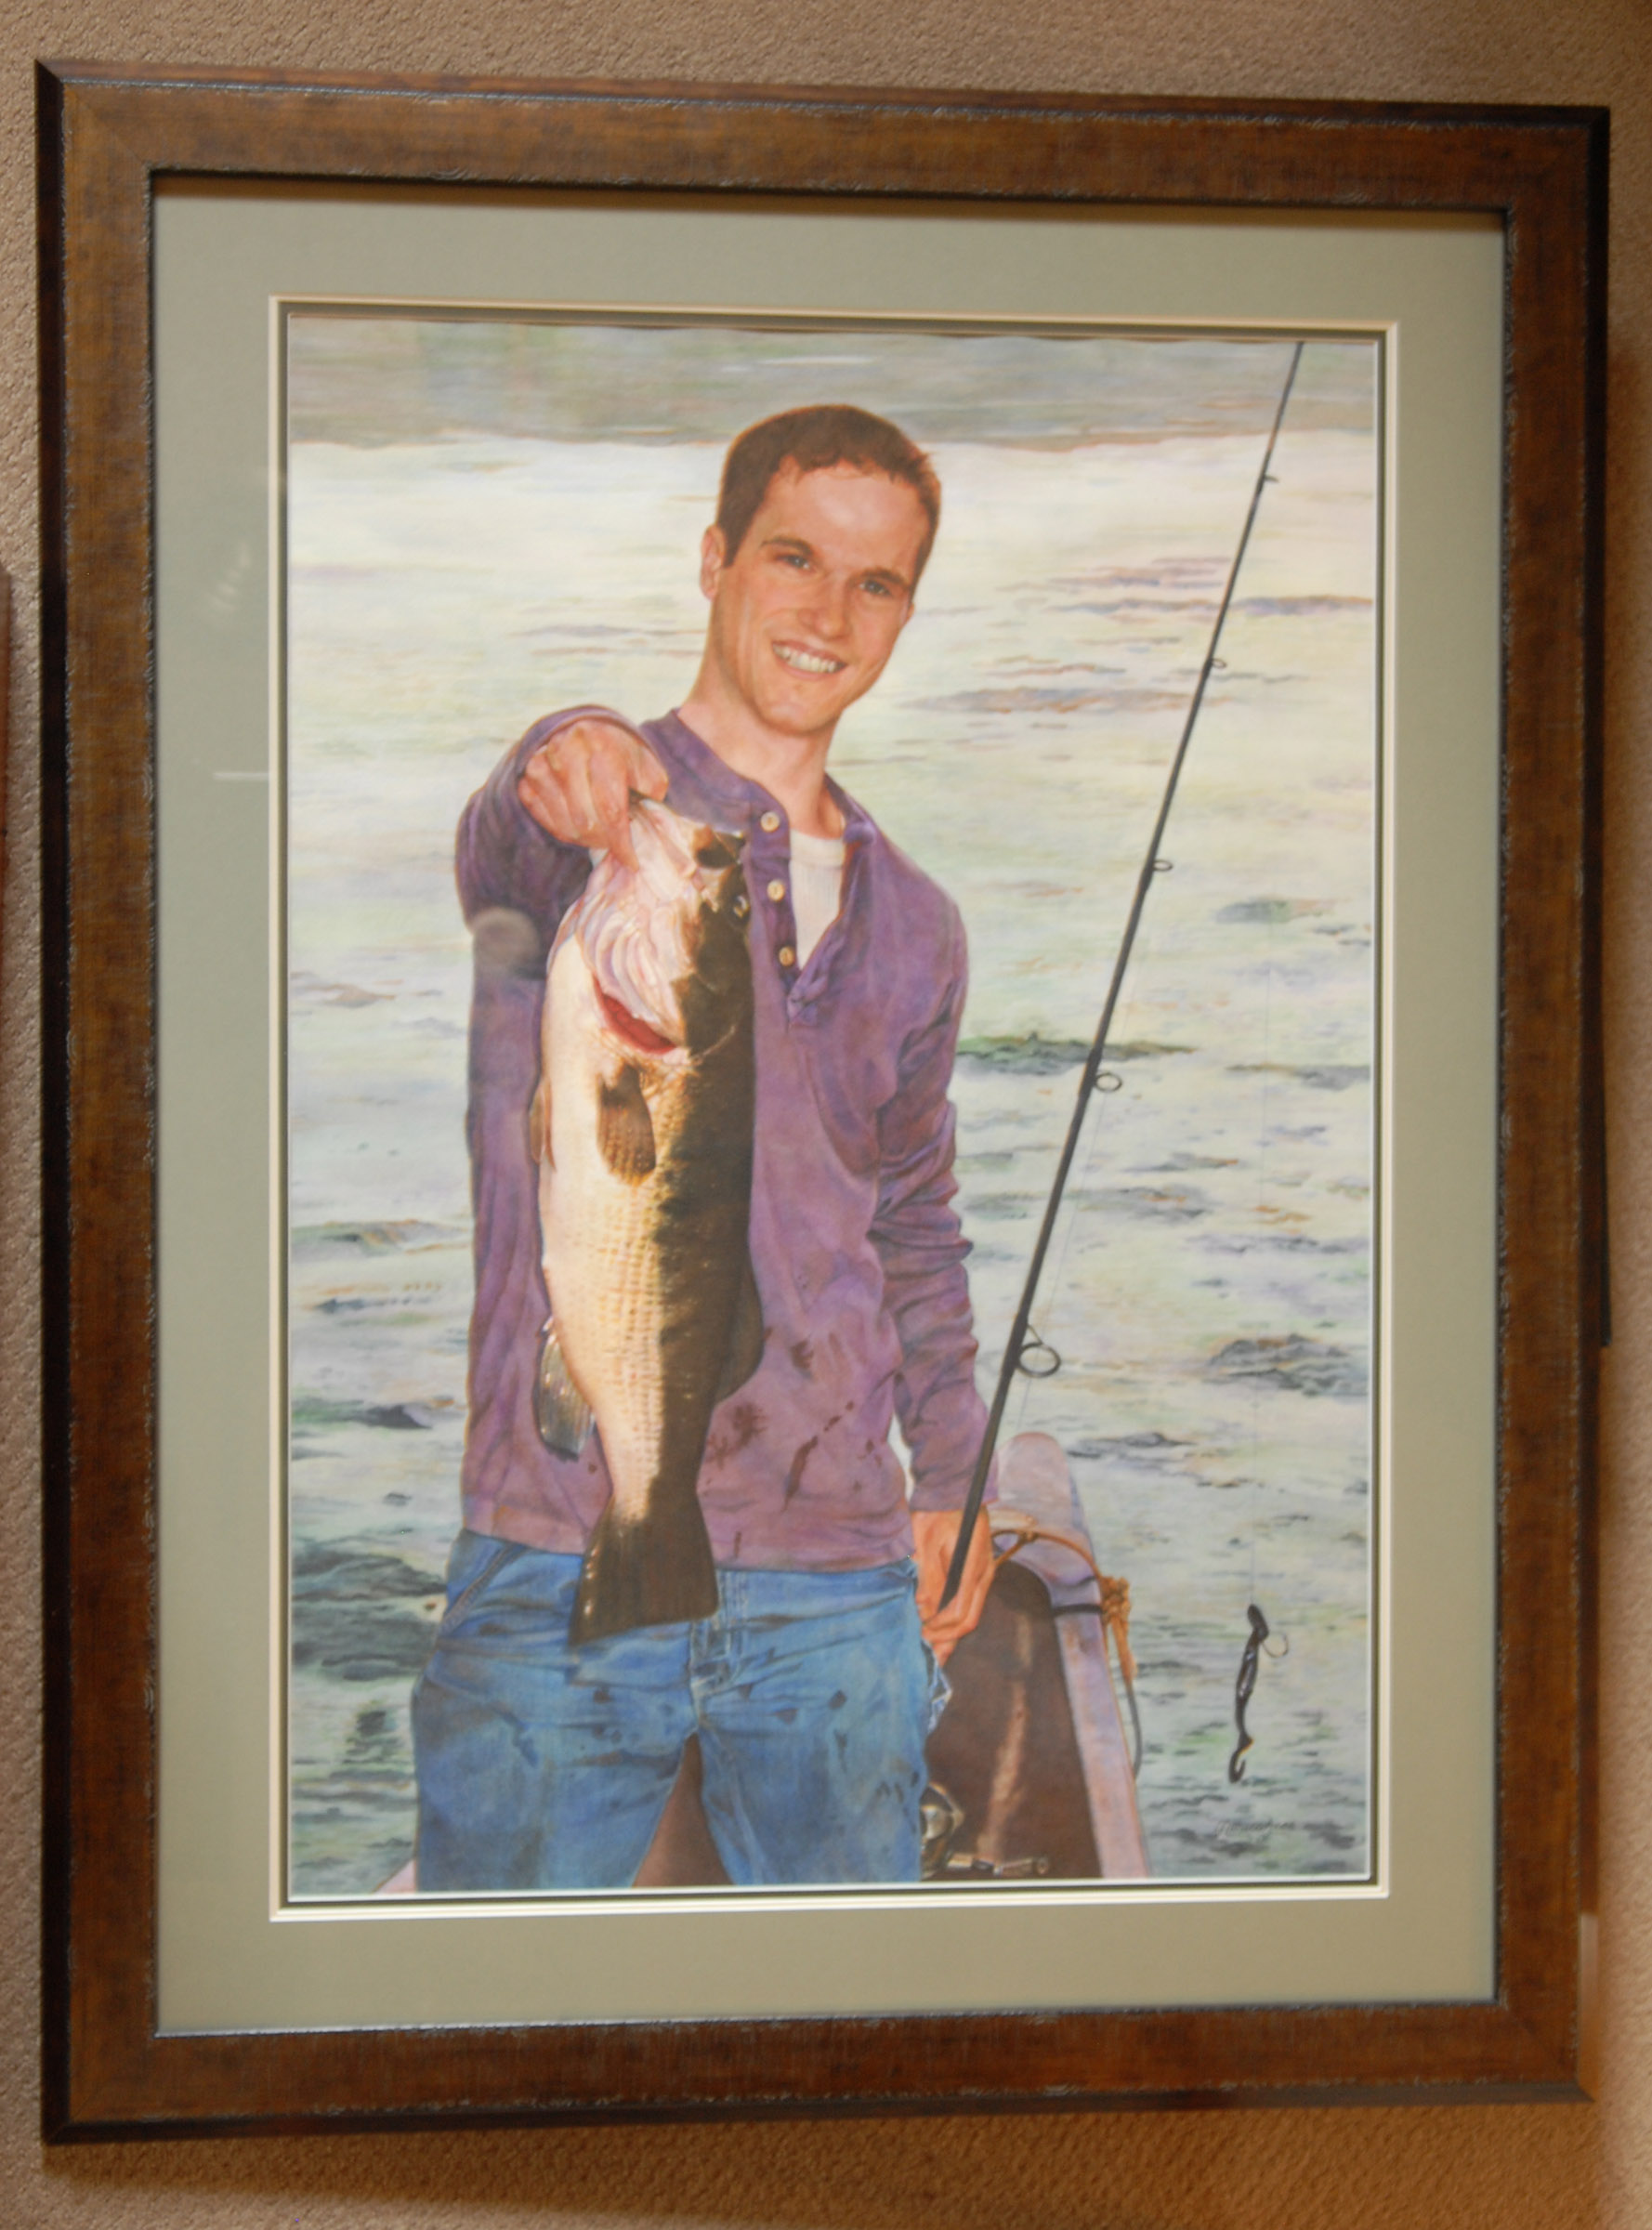 The portrait of Michael J. Cleary that hangs in Siuda House.